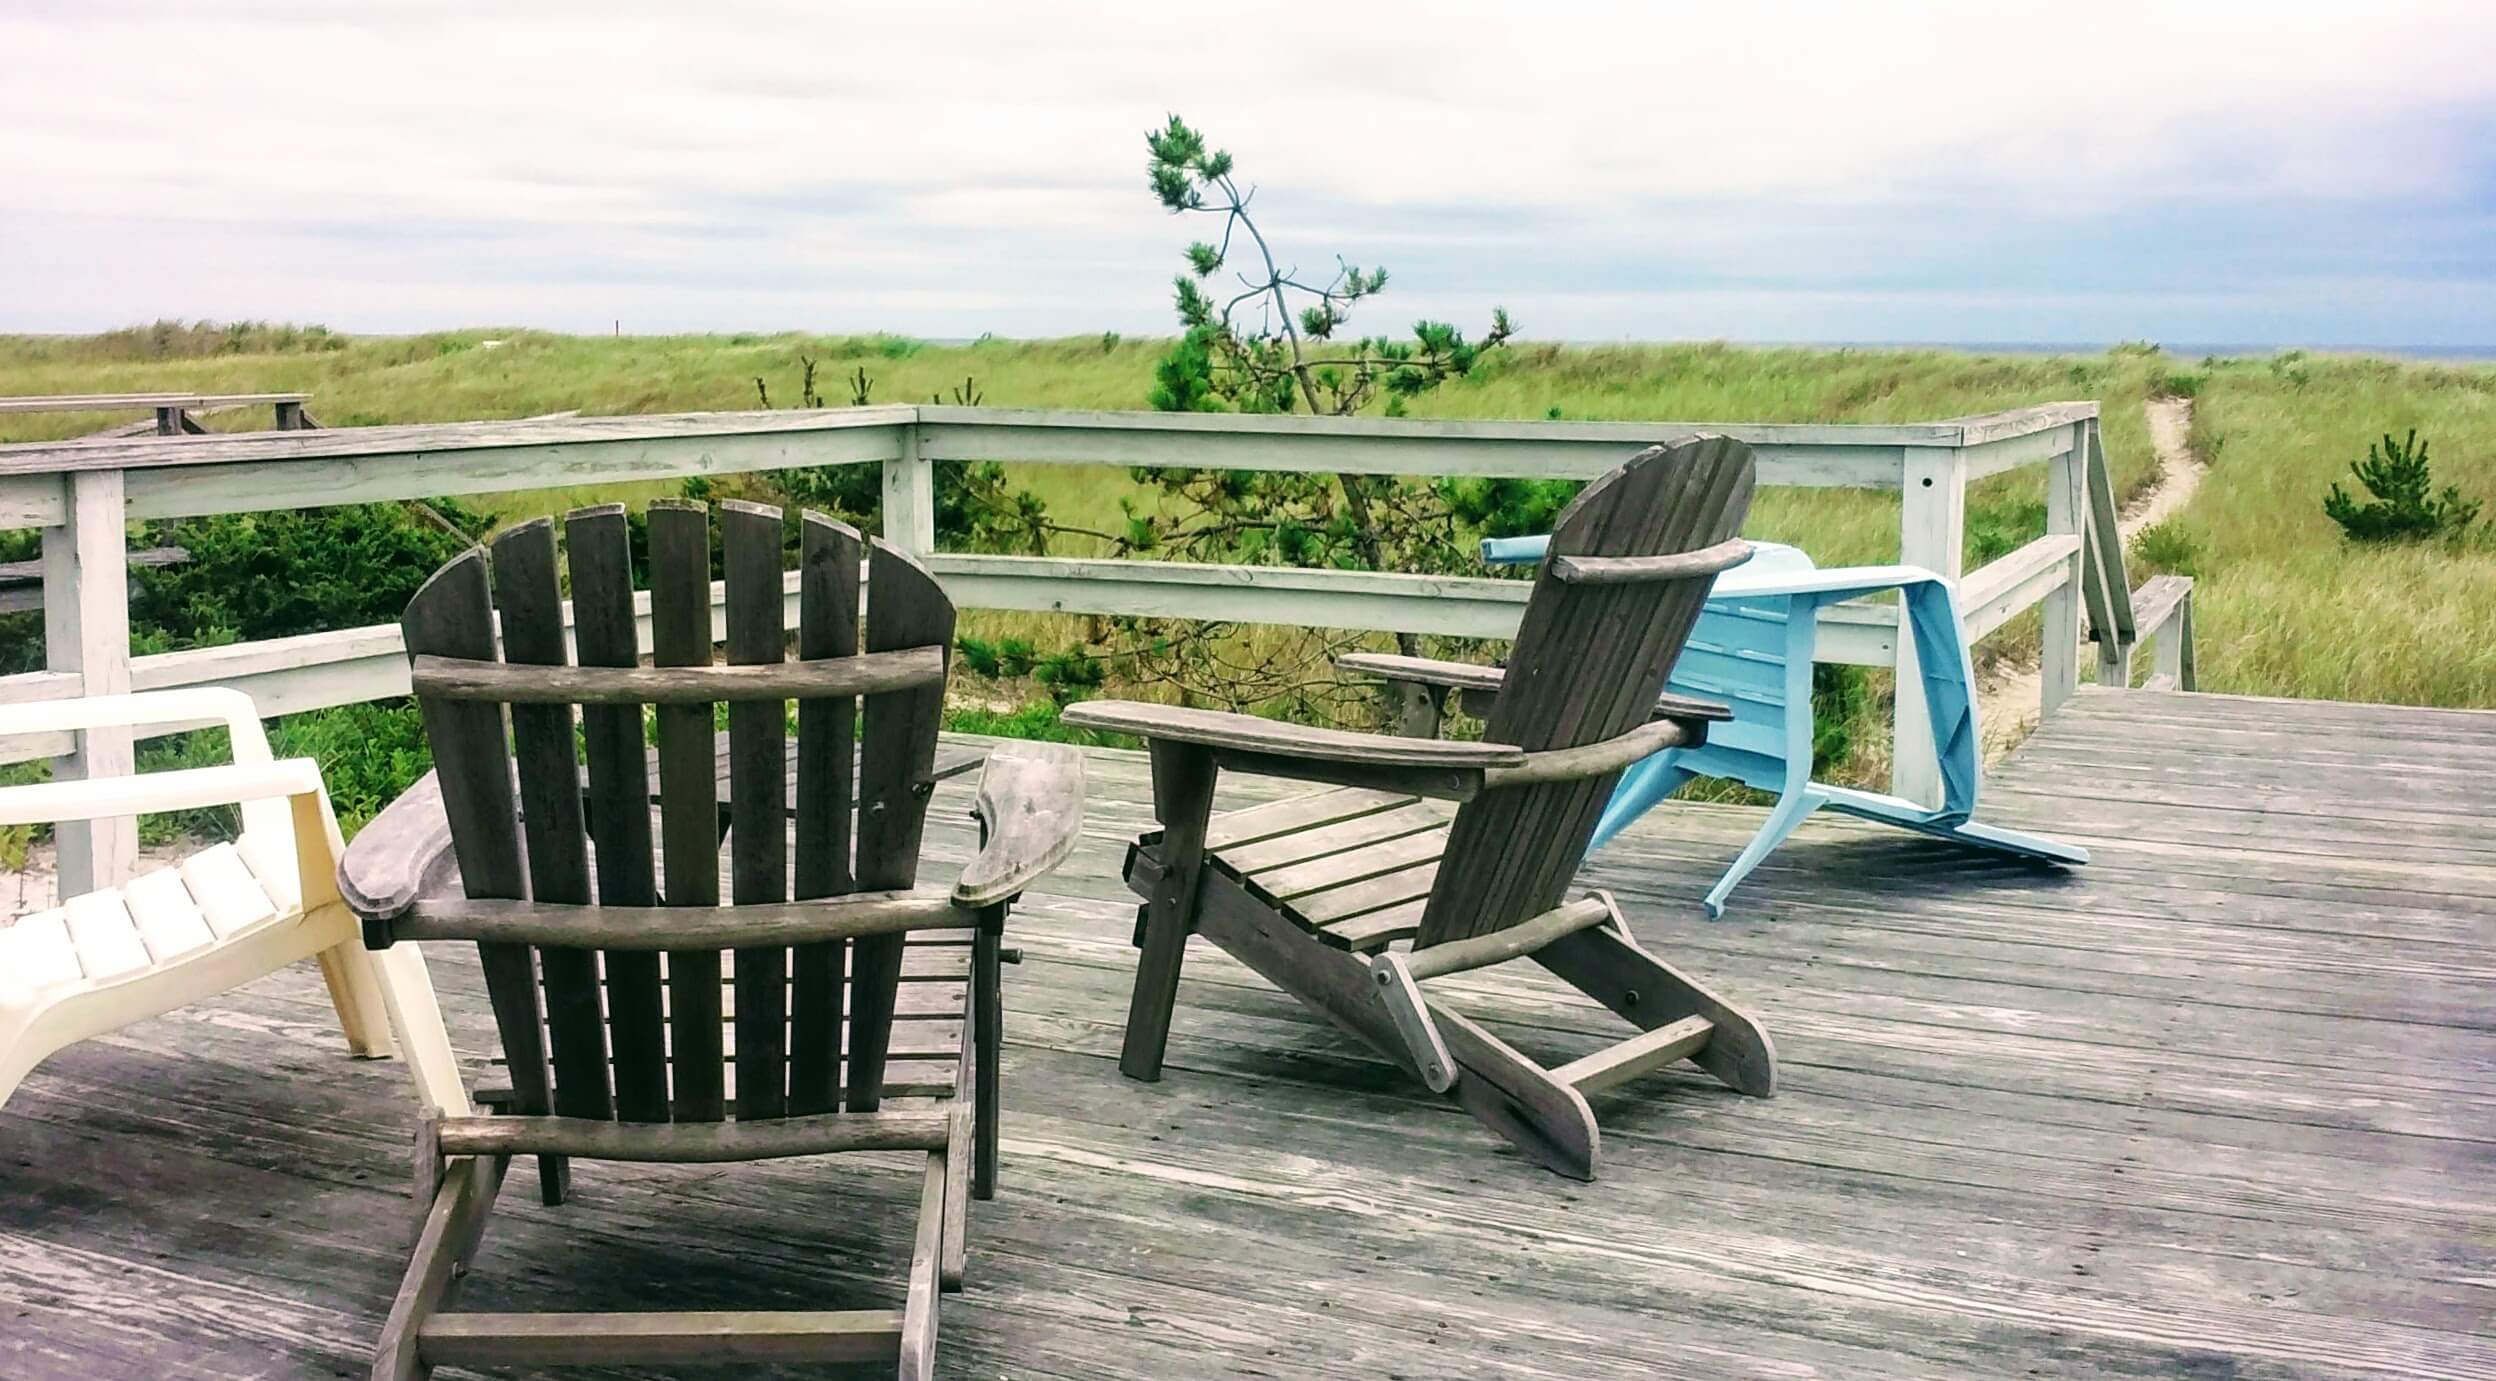 Beach grass and cloudy skies with forgotten Adirondack chairs turned on their sides